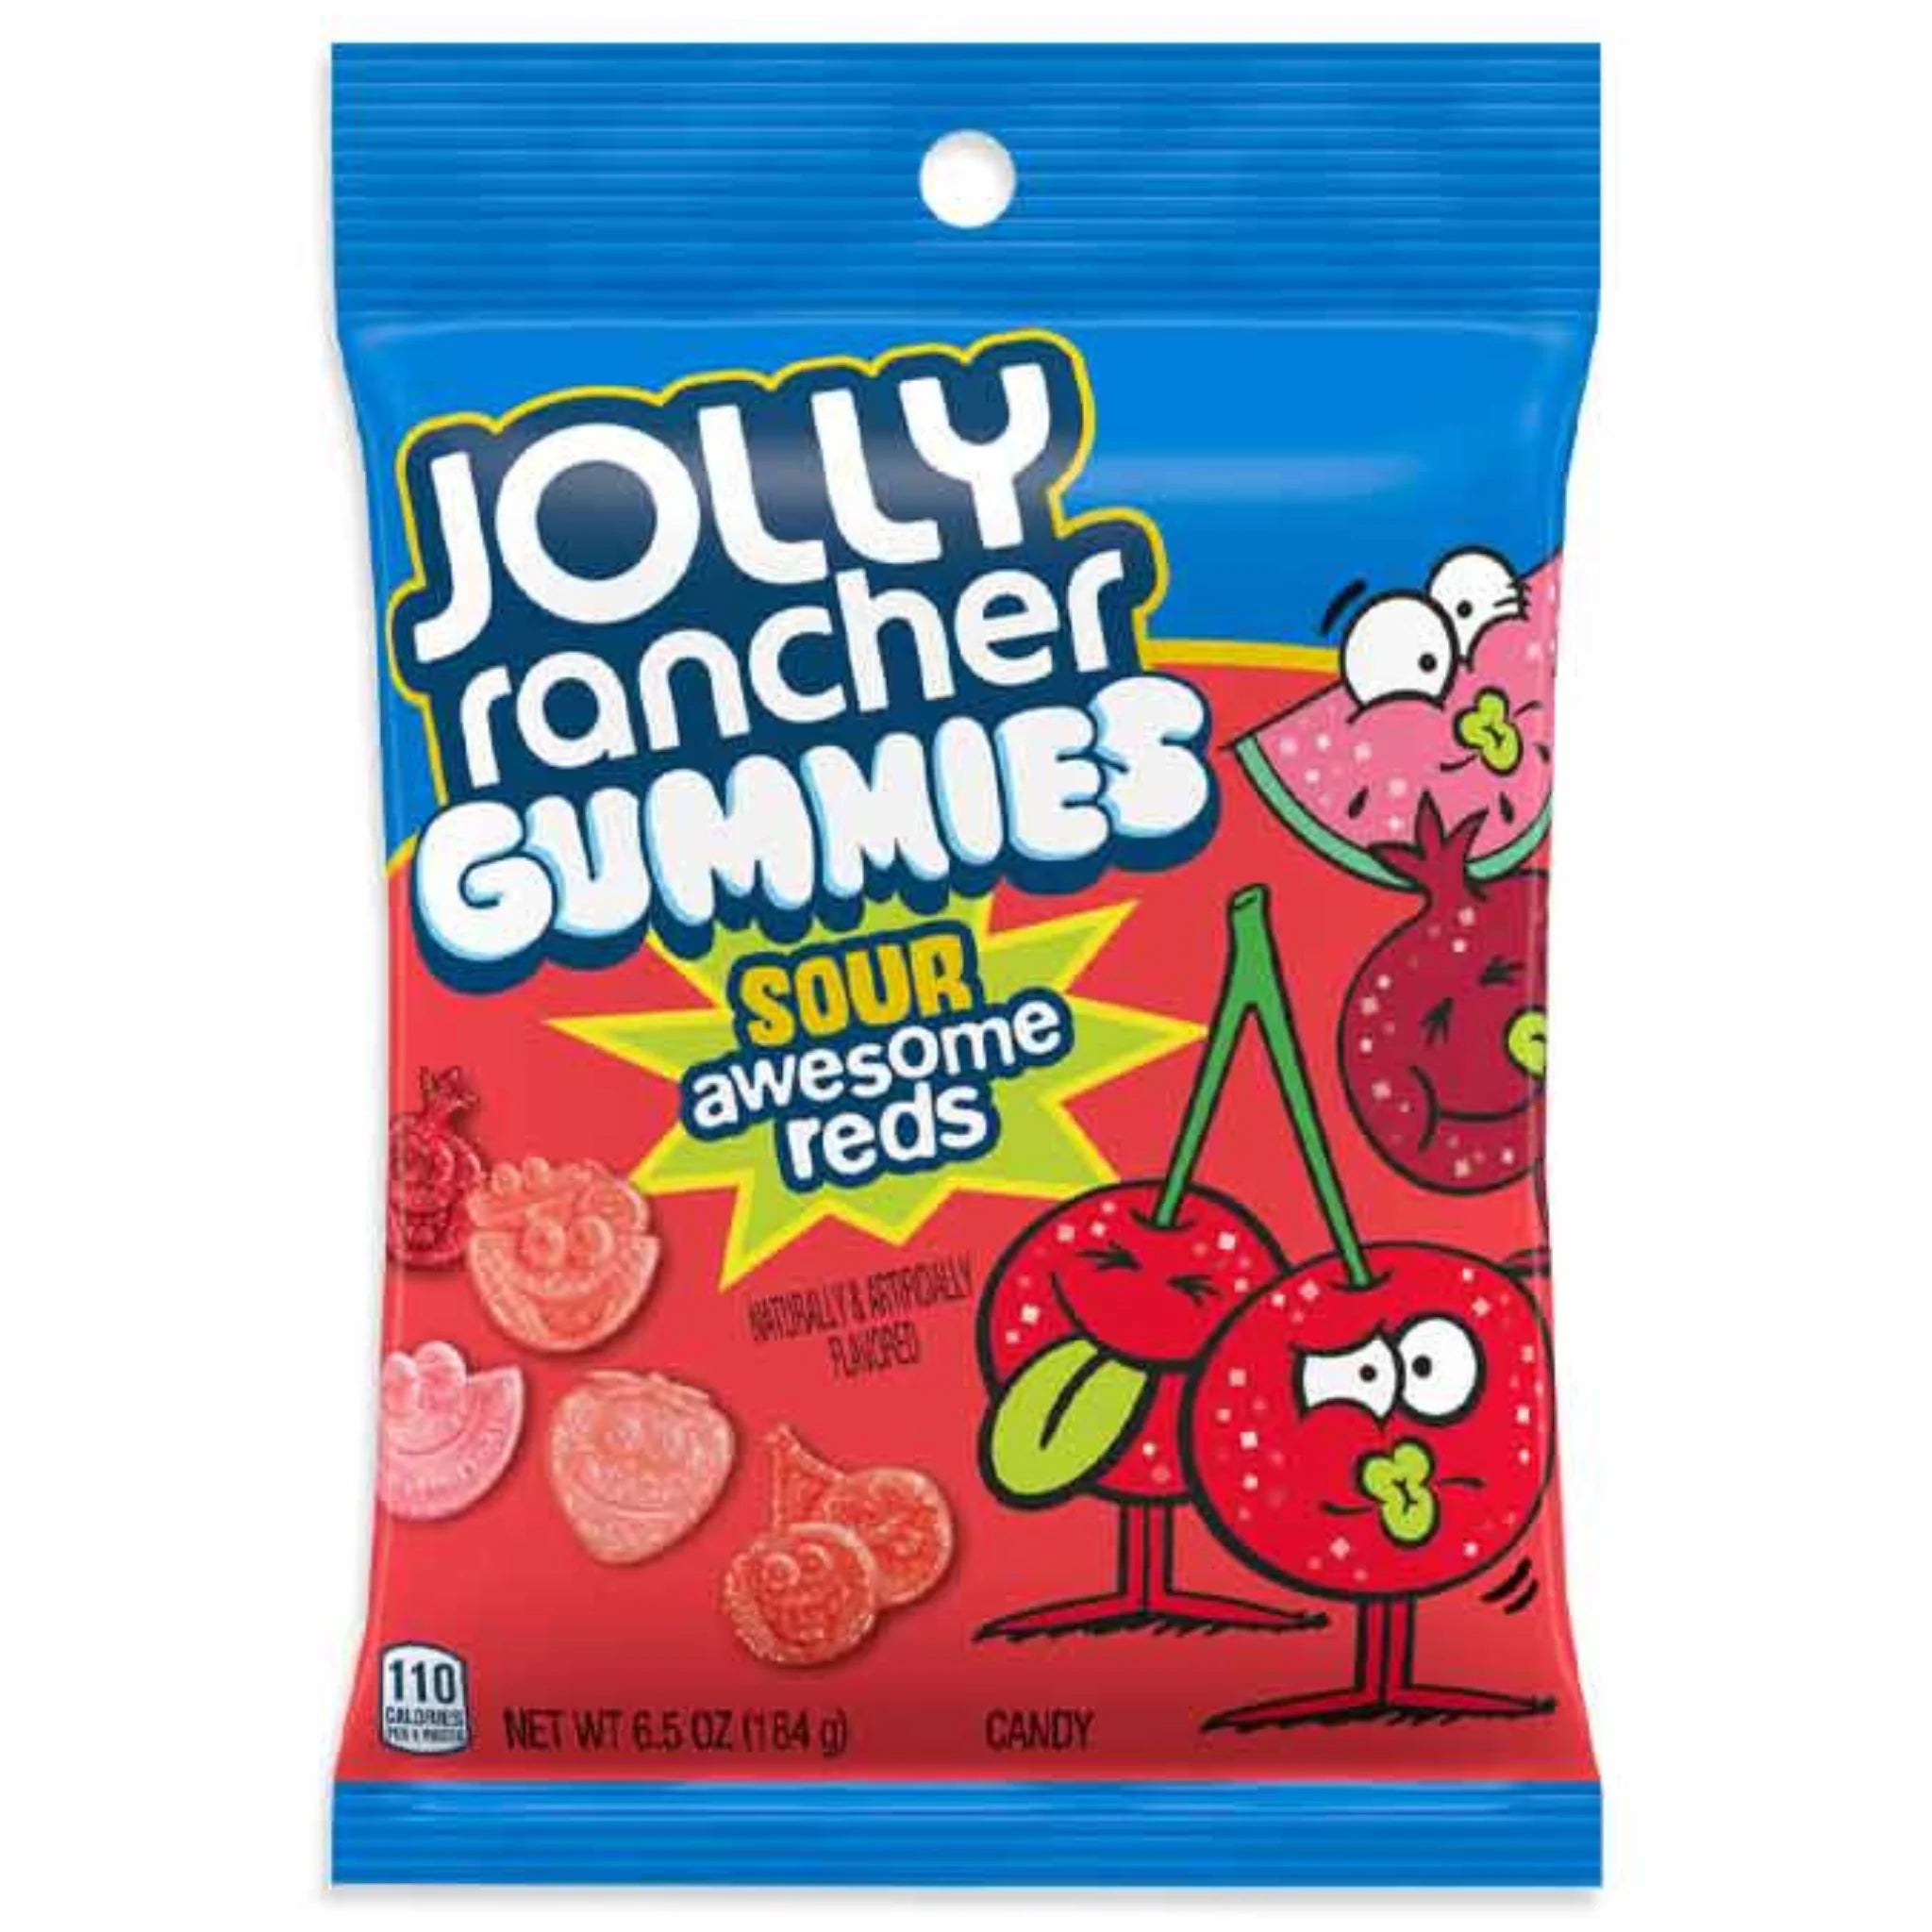 Jolly Rancher Gummies: Sour Awesome Reds (5oz bag)